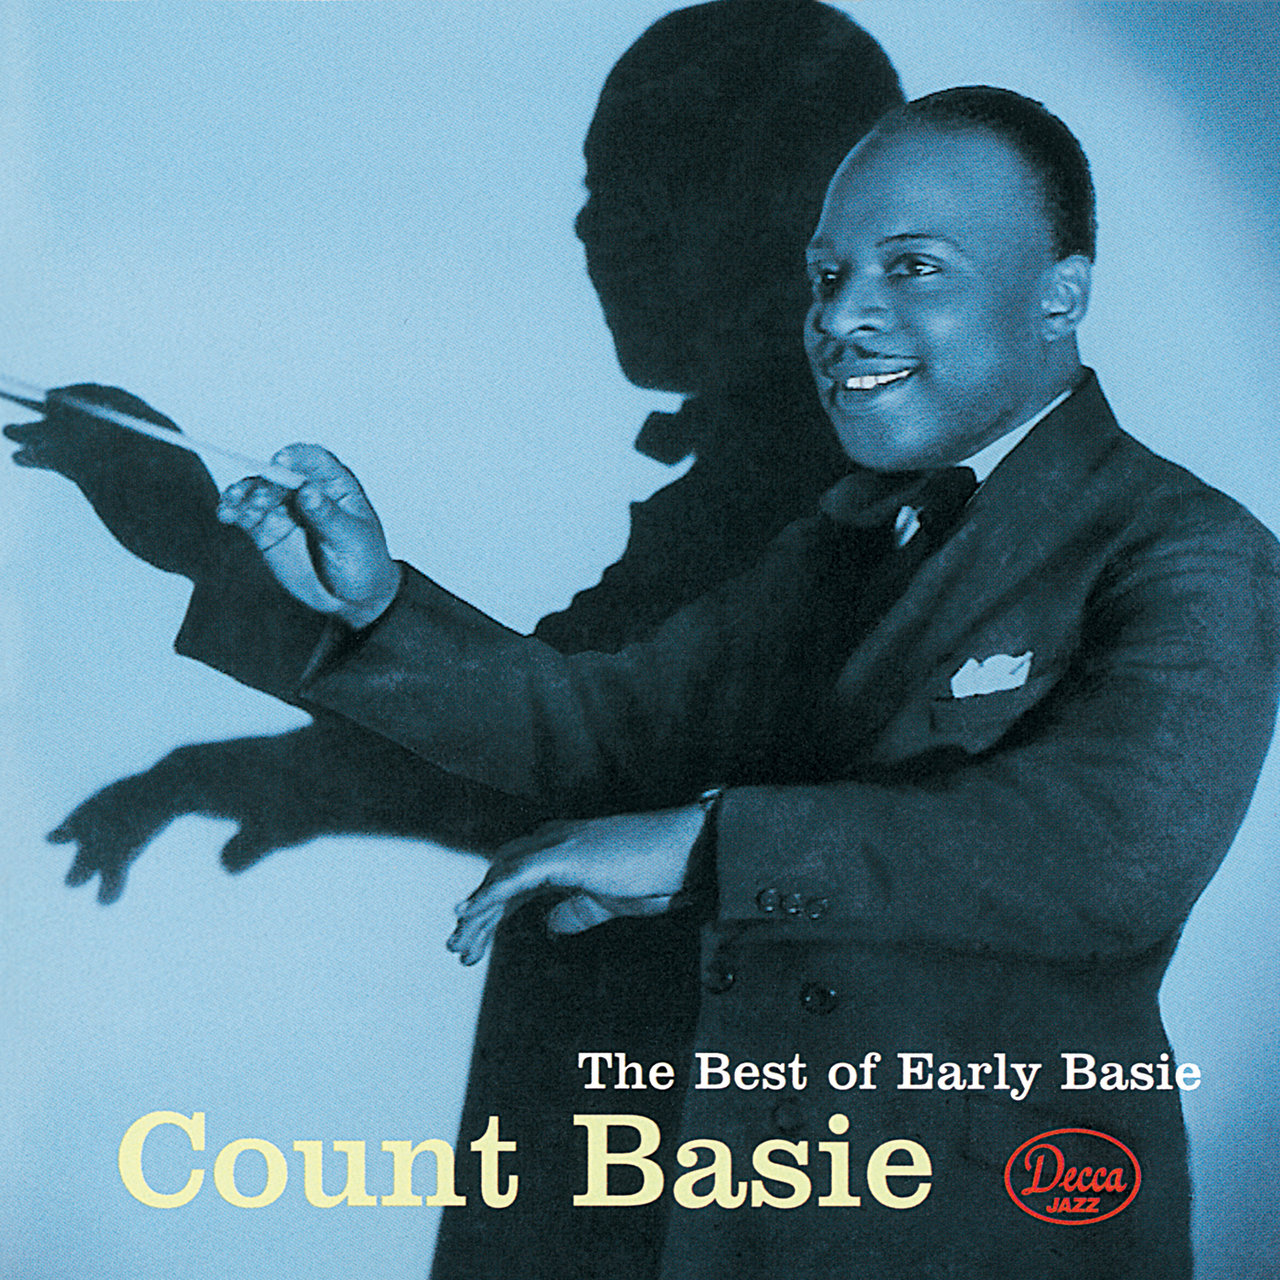 The Best Of Early Basie [1996]